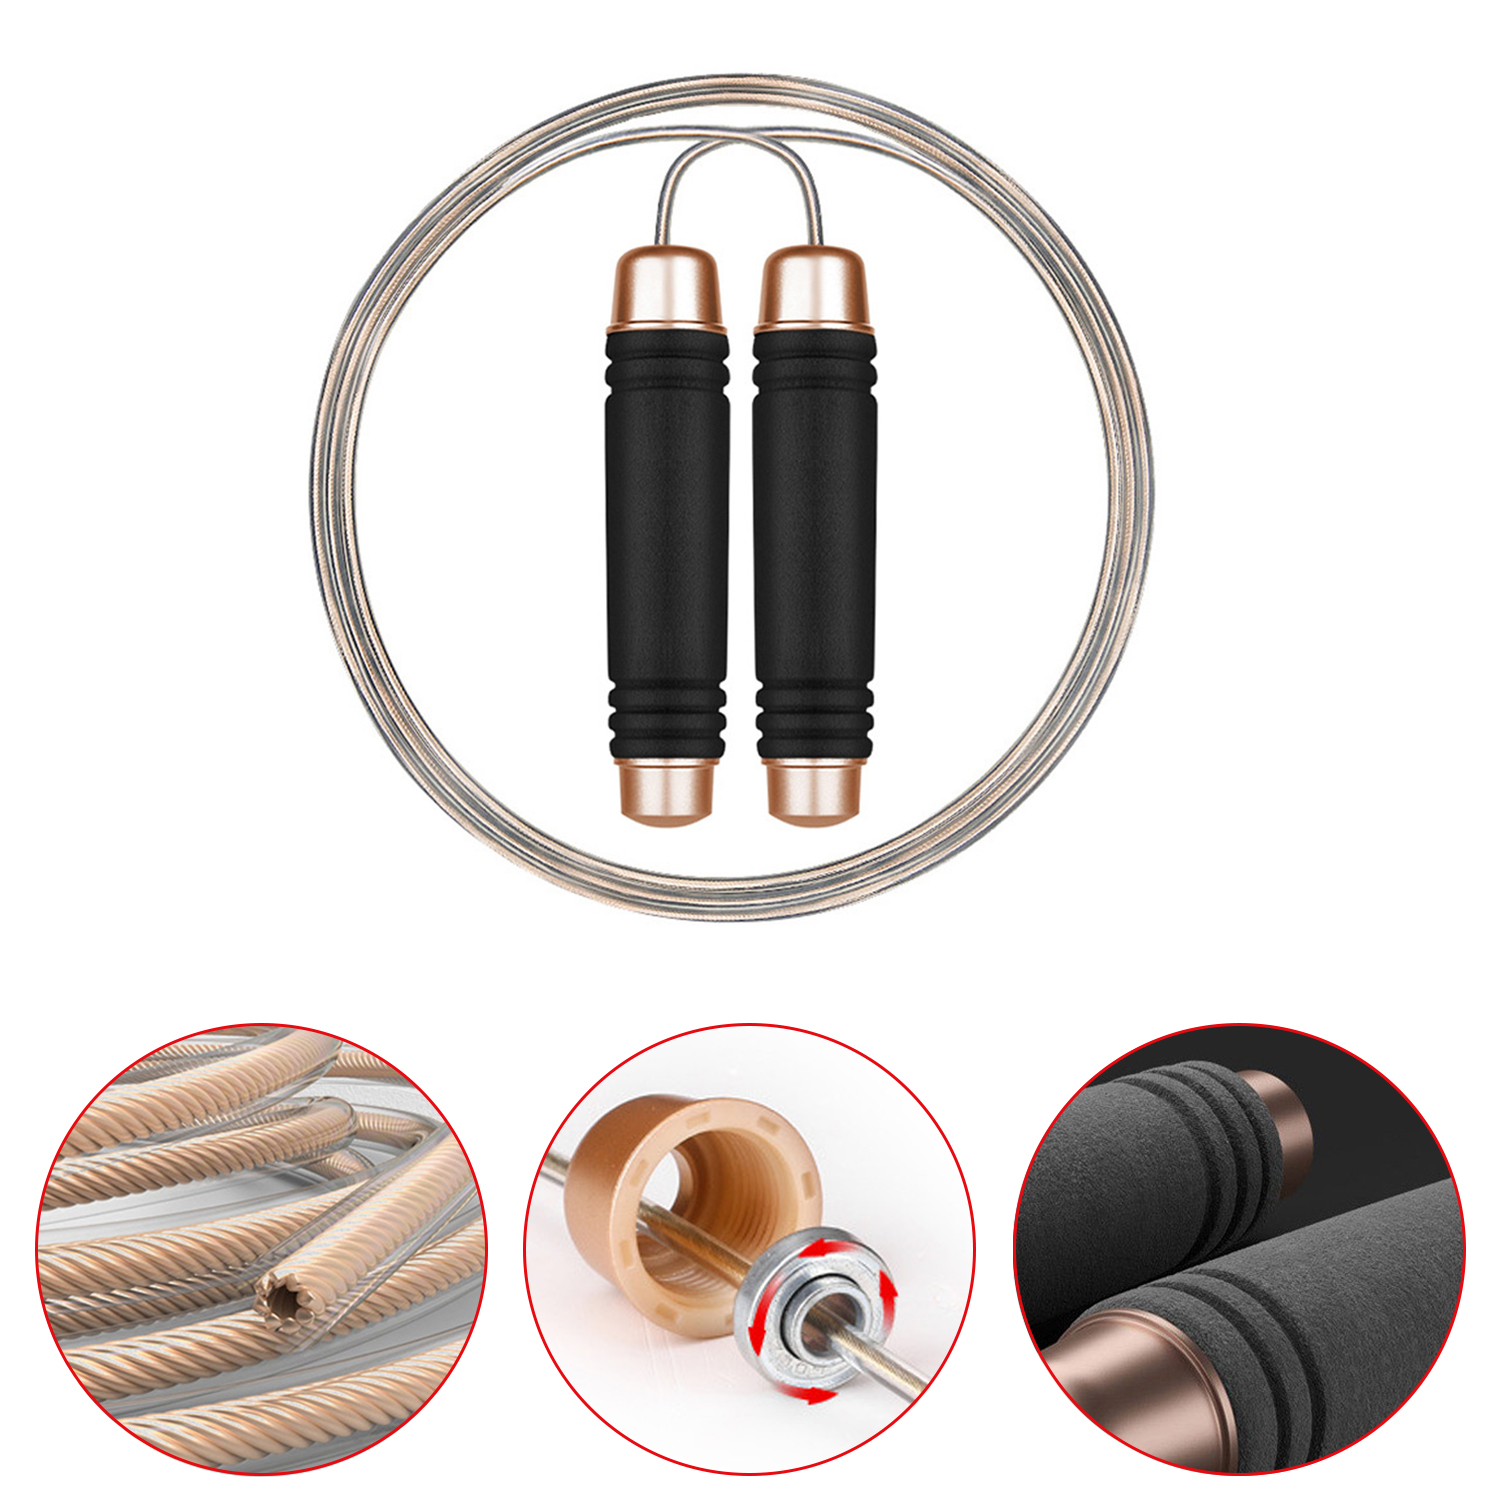 Home Fitness Yoga Jumping Rope Pvc Steel Exercise Workout Jump Ropes Heavy Weight Loss Jump Skipping Rope